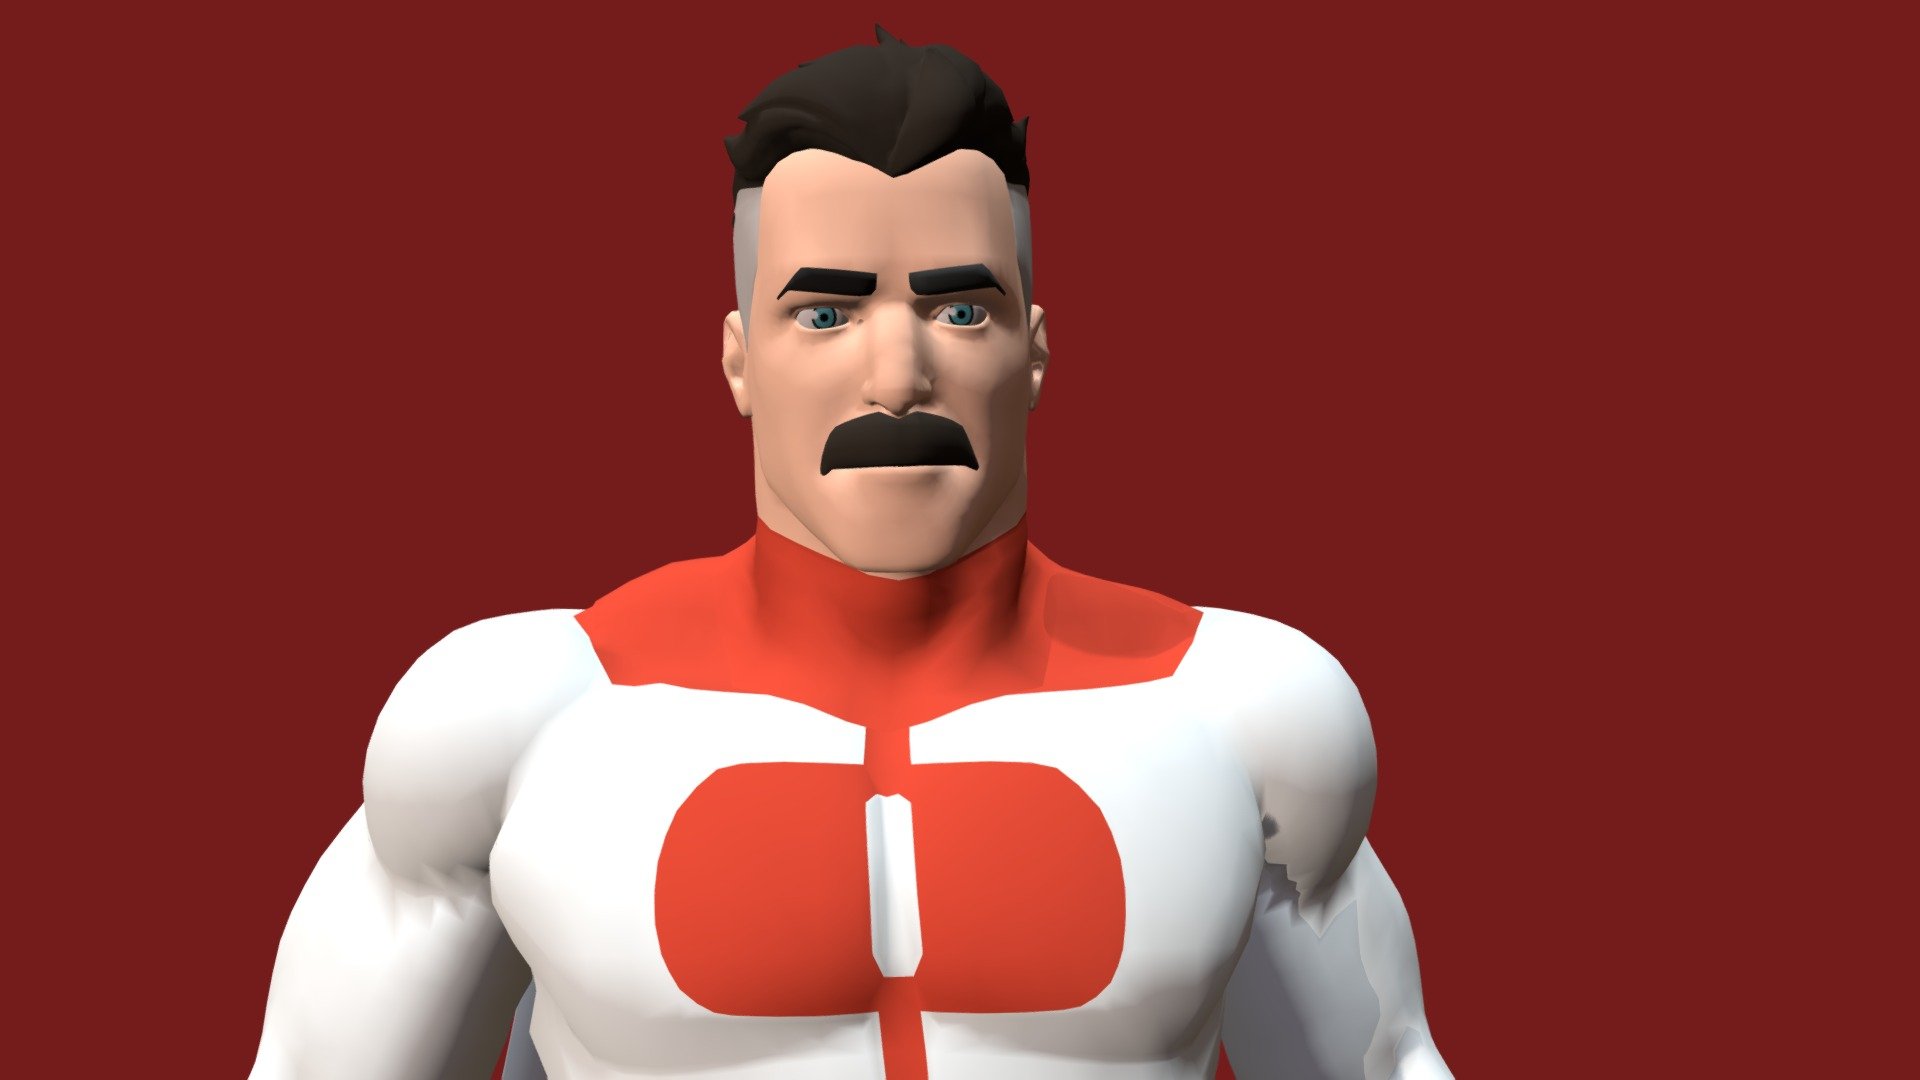 3D Model by: Epic Games

-----Version 1.0.3------

New Update:




Fixed mostache, hair, and body

Fixed eyebrow position

Fixed Charater Gyatt

Fixed textures (Now with Folder)

(I do not own this Model) - Omni Man Fortnite - Download Free 3D model by Swimknot19 (@RafaMario) 3d model